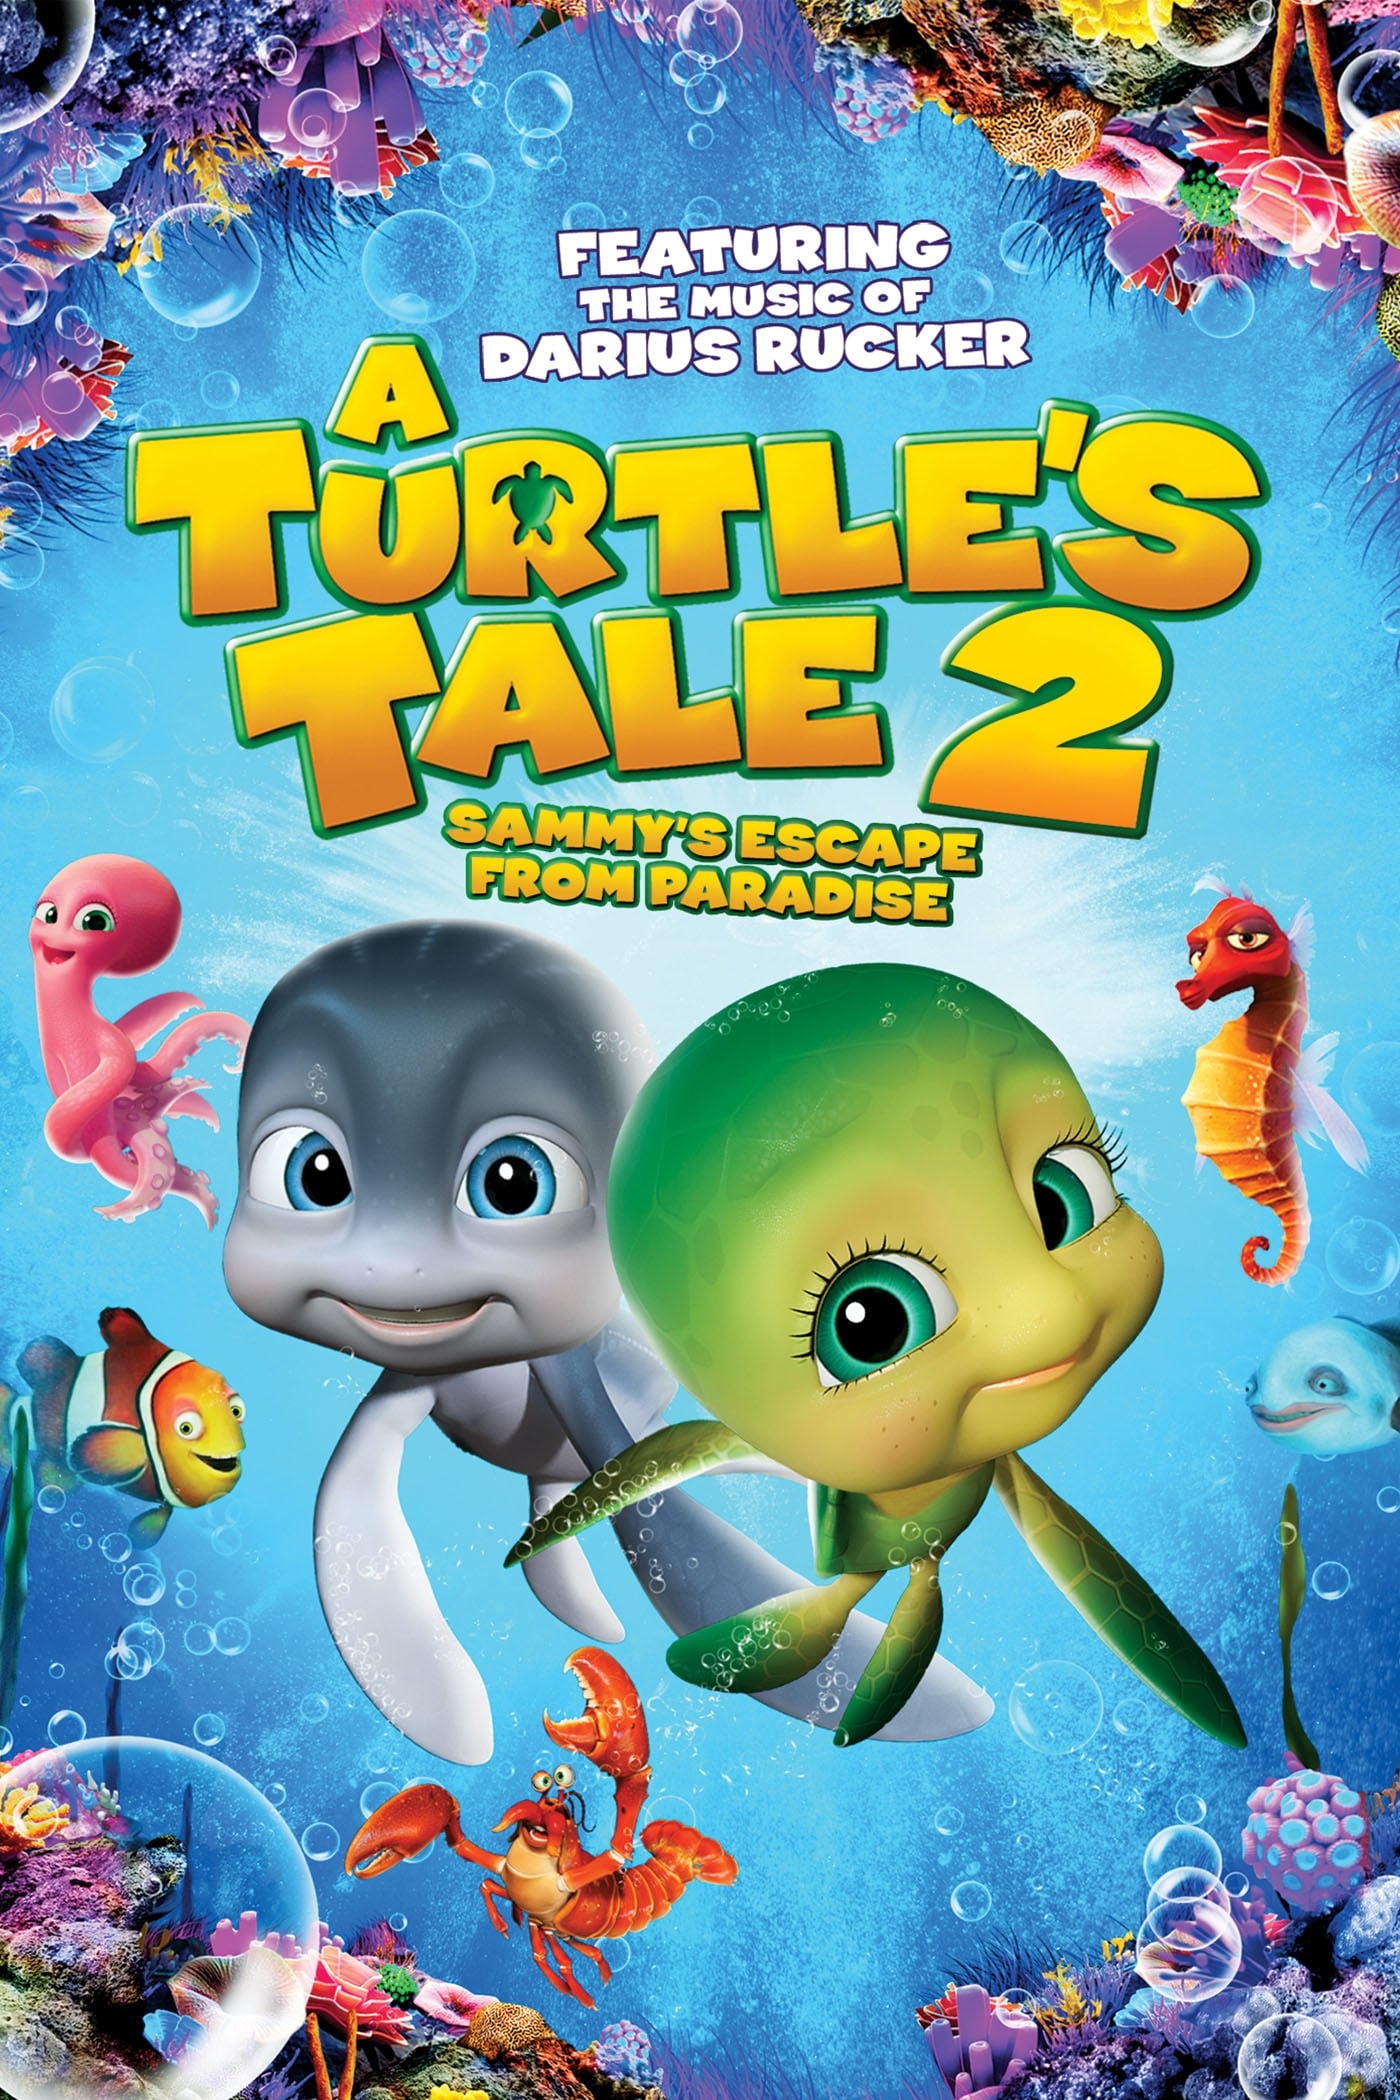 Amazoncom: A Turtles Tale 2: Sammys Escape From